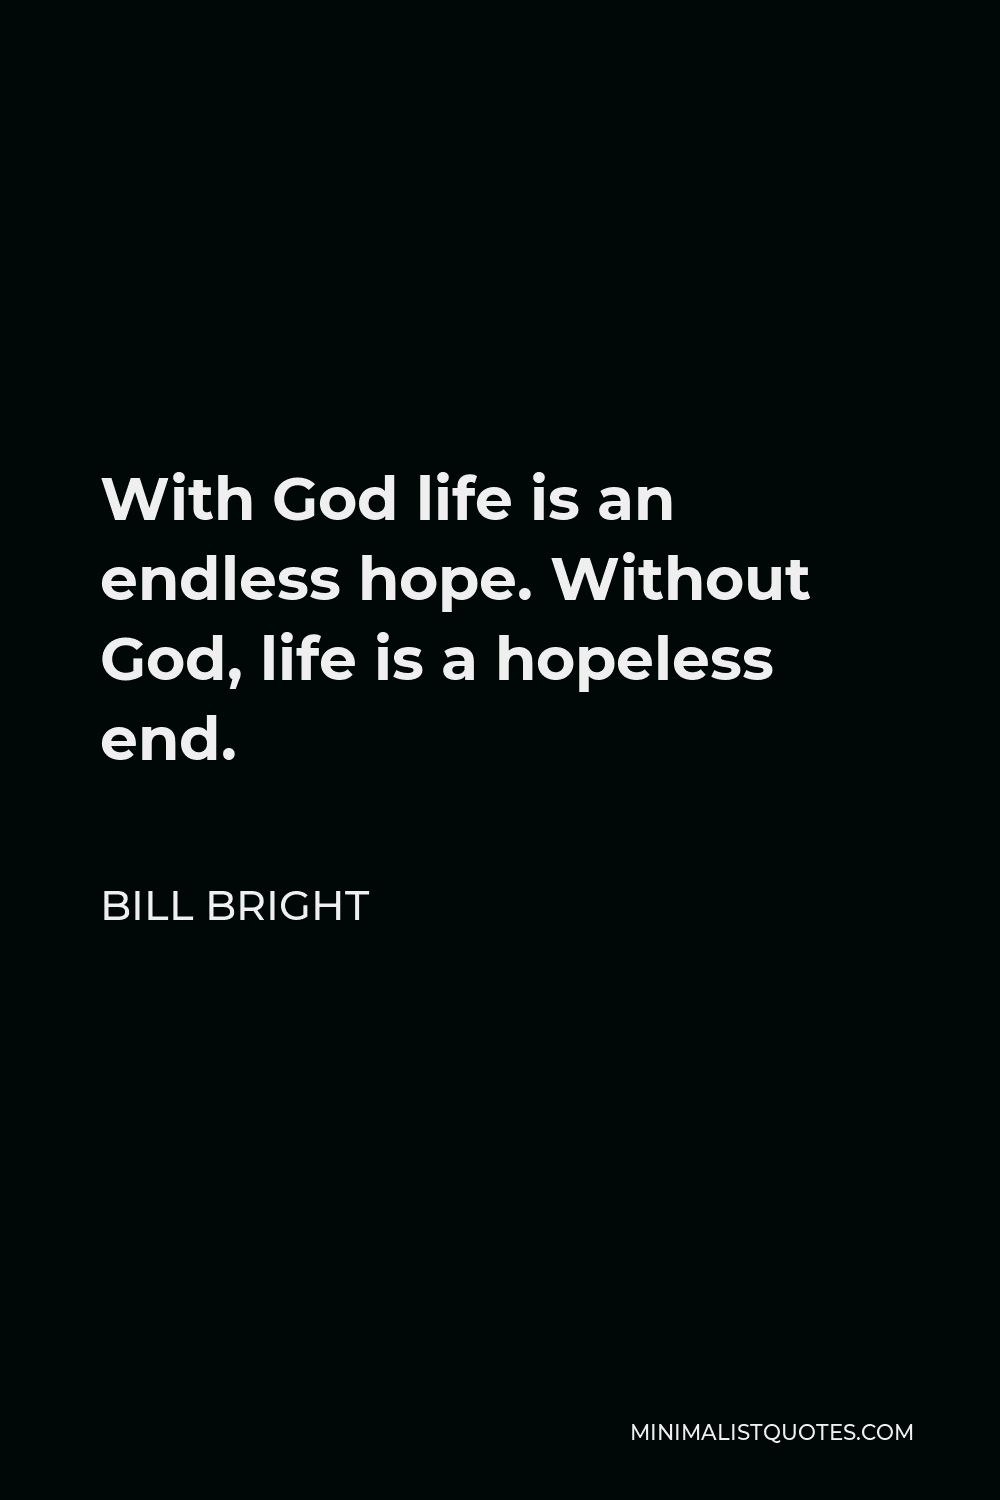 Bill Bright Quote - With God life is an endless hope. Without God, life is a hopeless end.